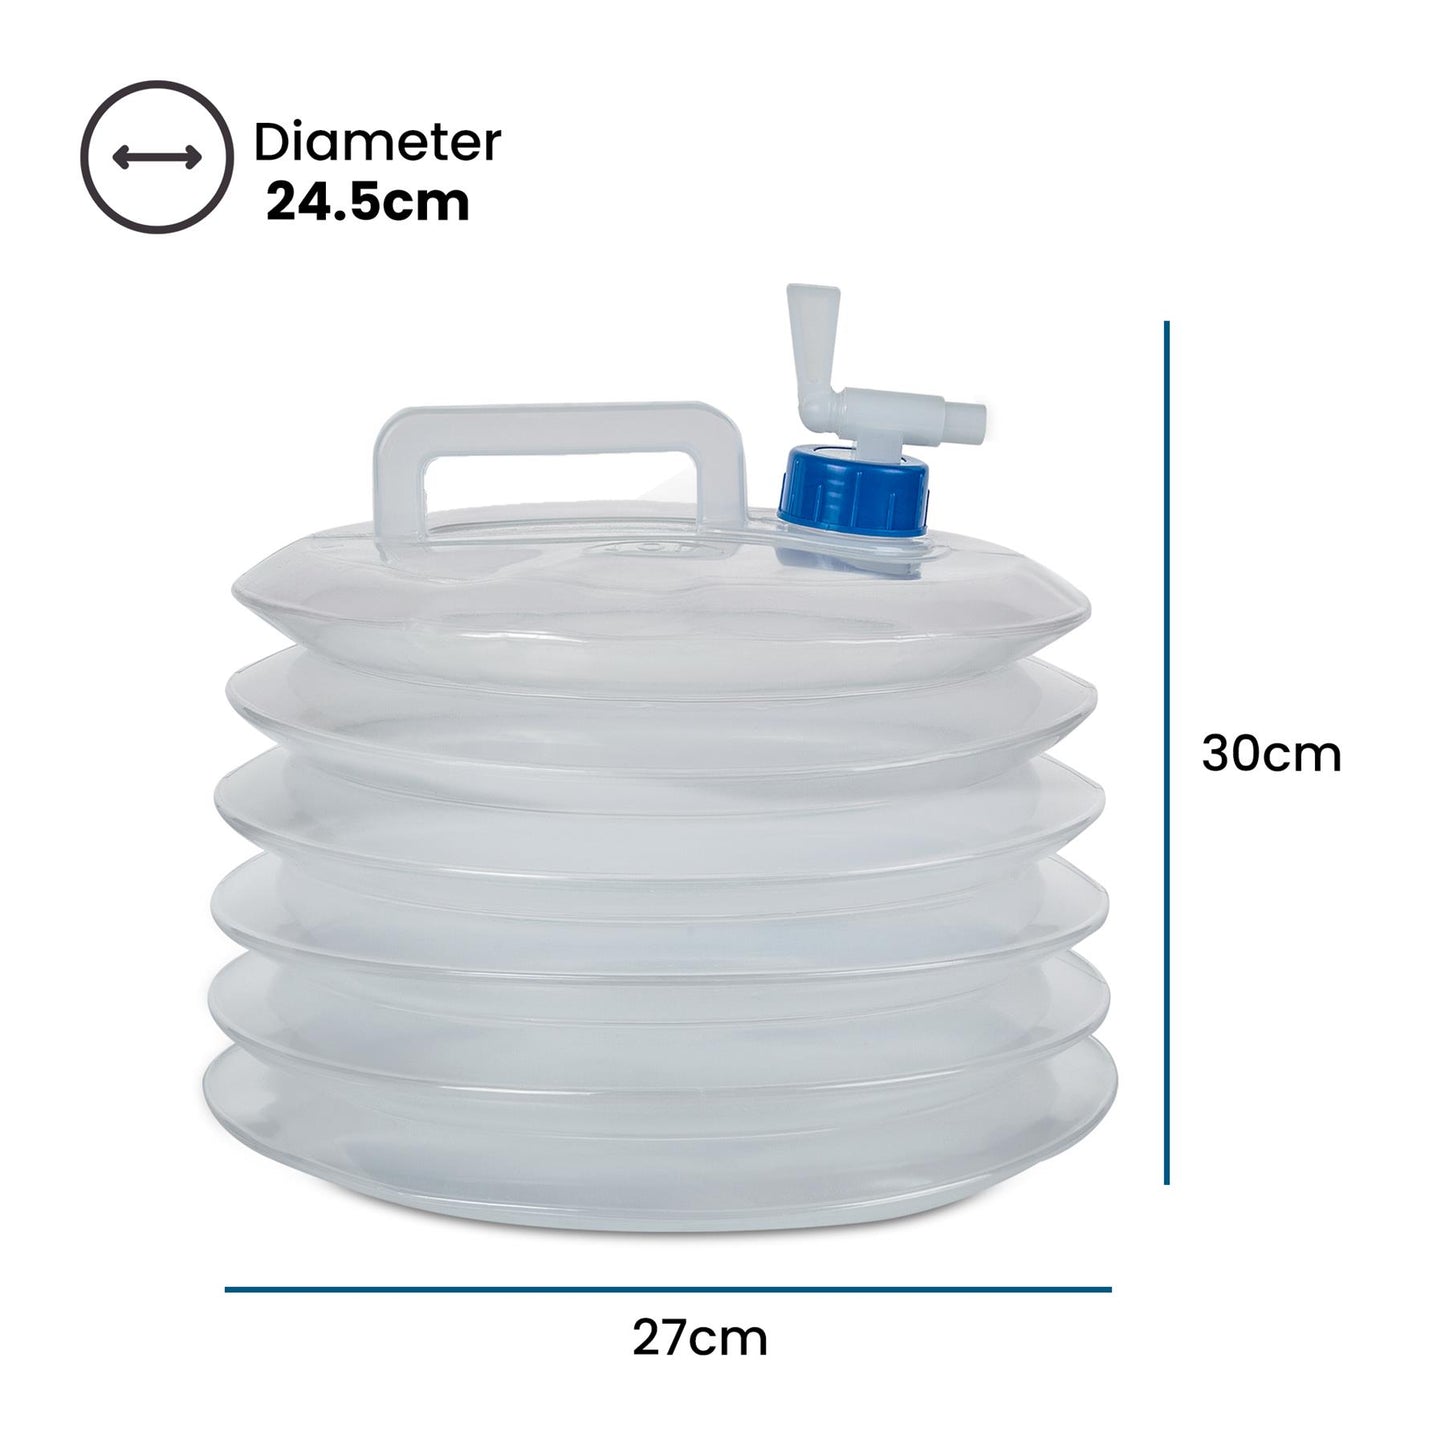 10L Capacity Collapsible Water Bottle